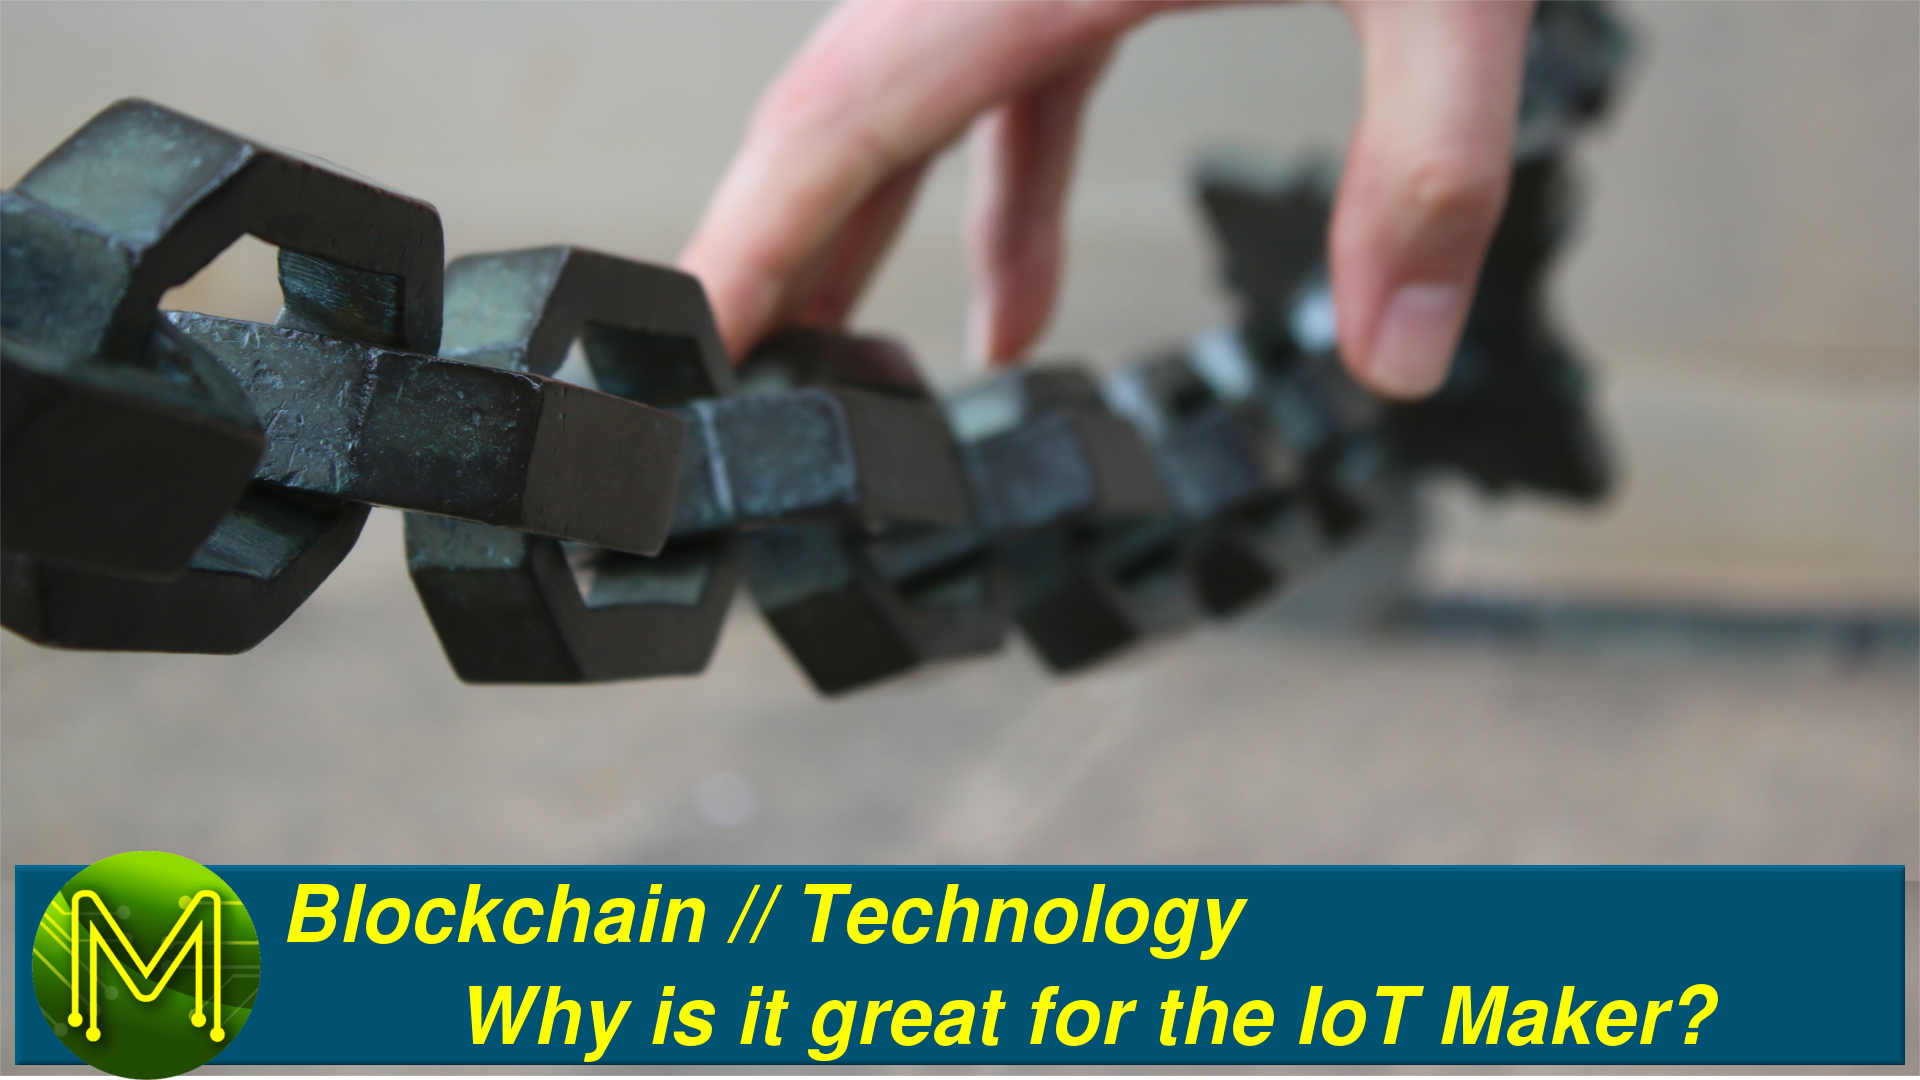 Blockchain: Why is it great for IoT Makers? // Technology